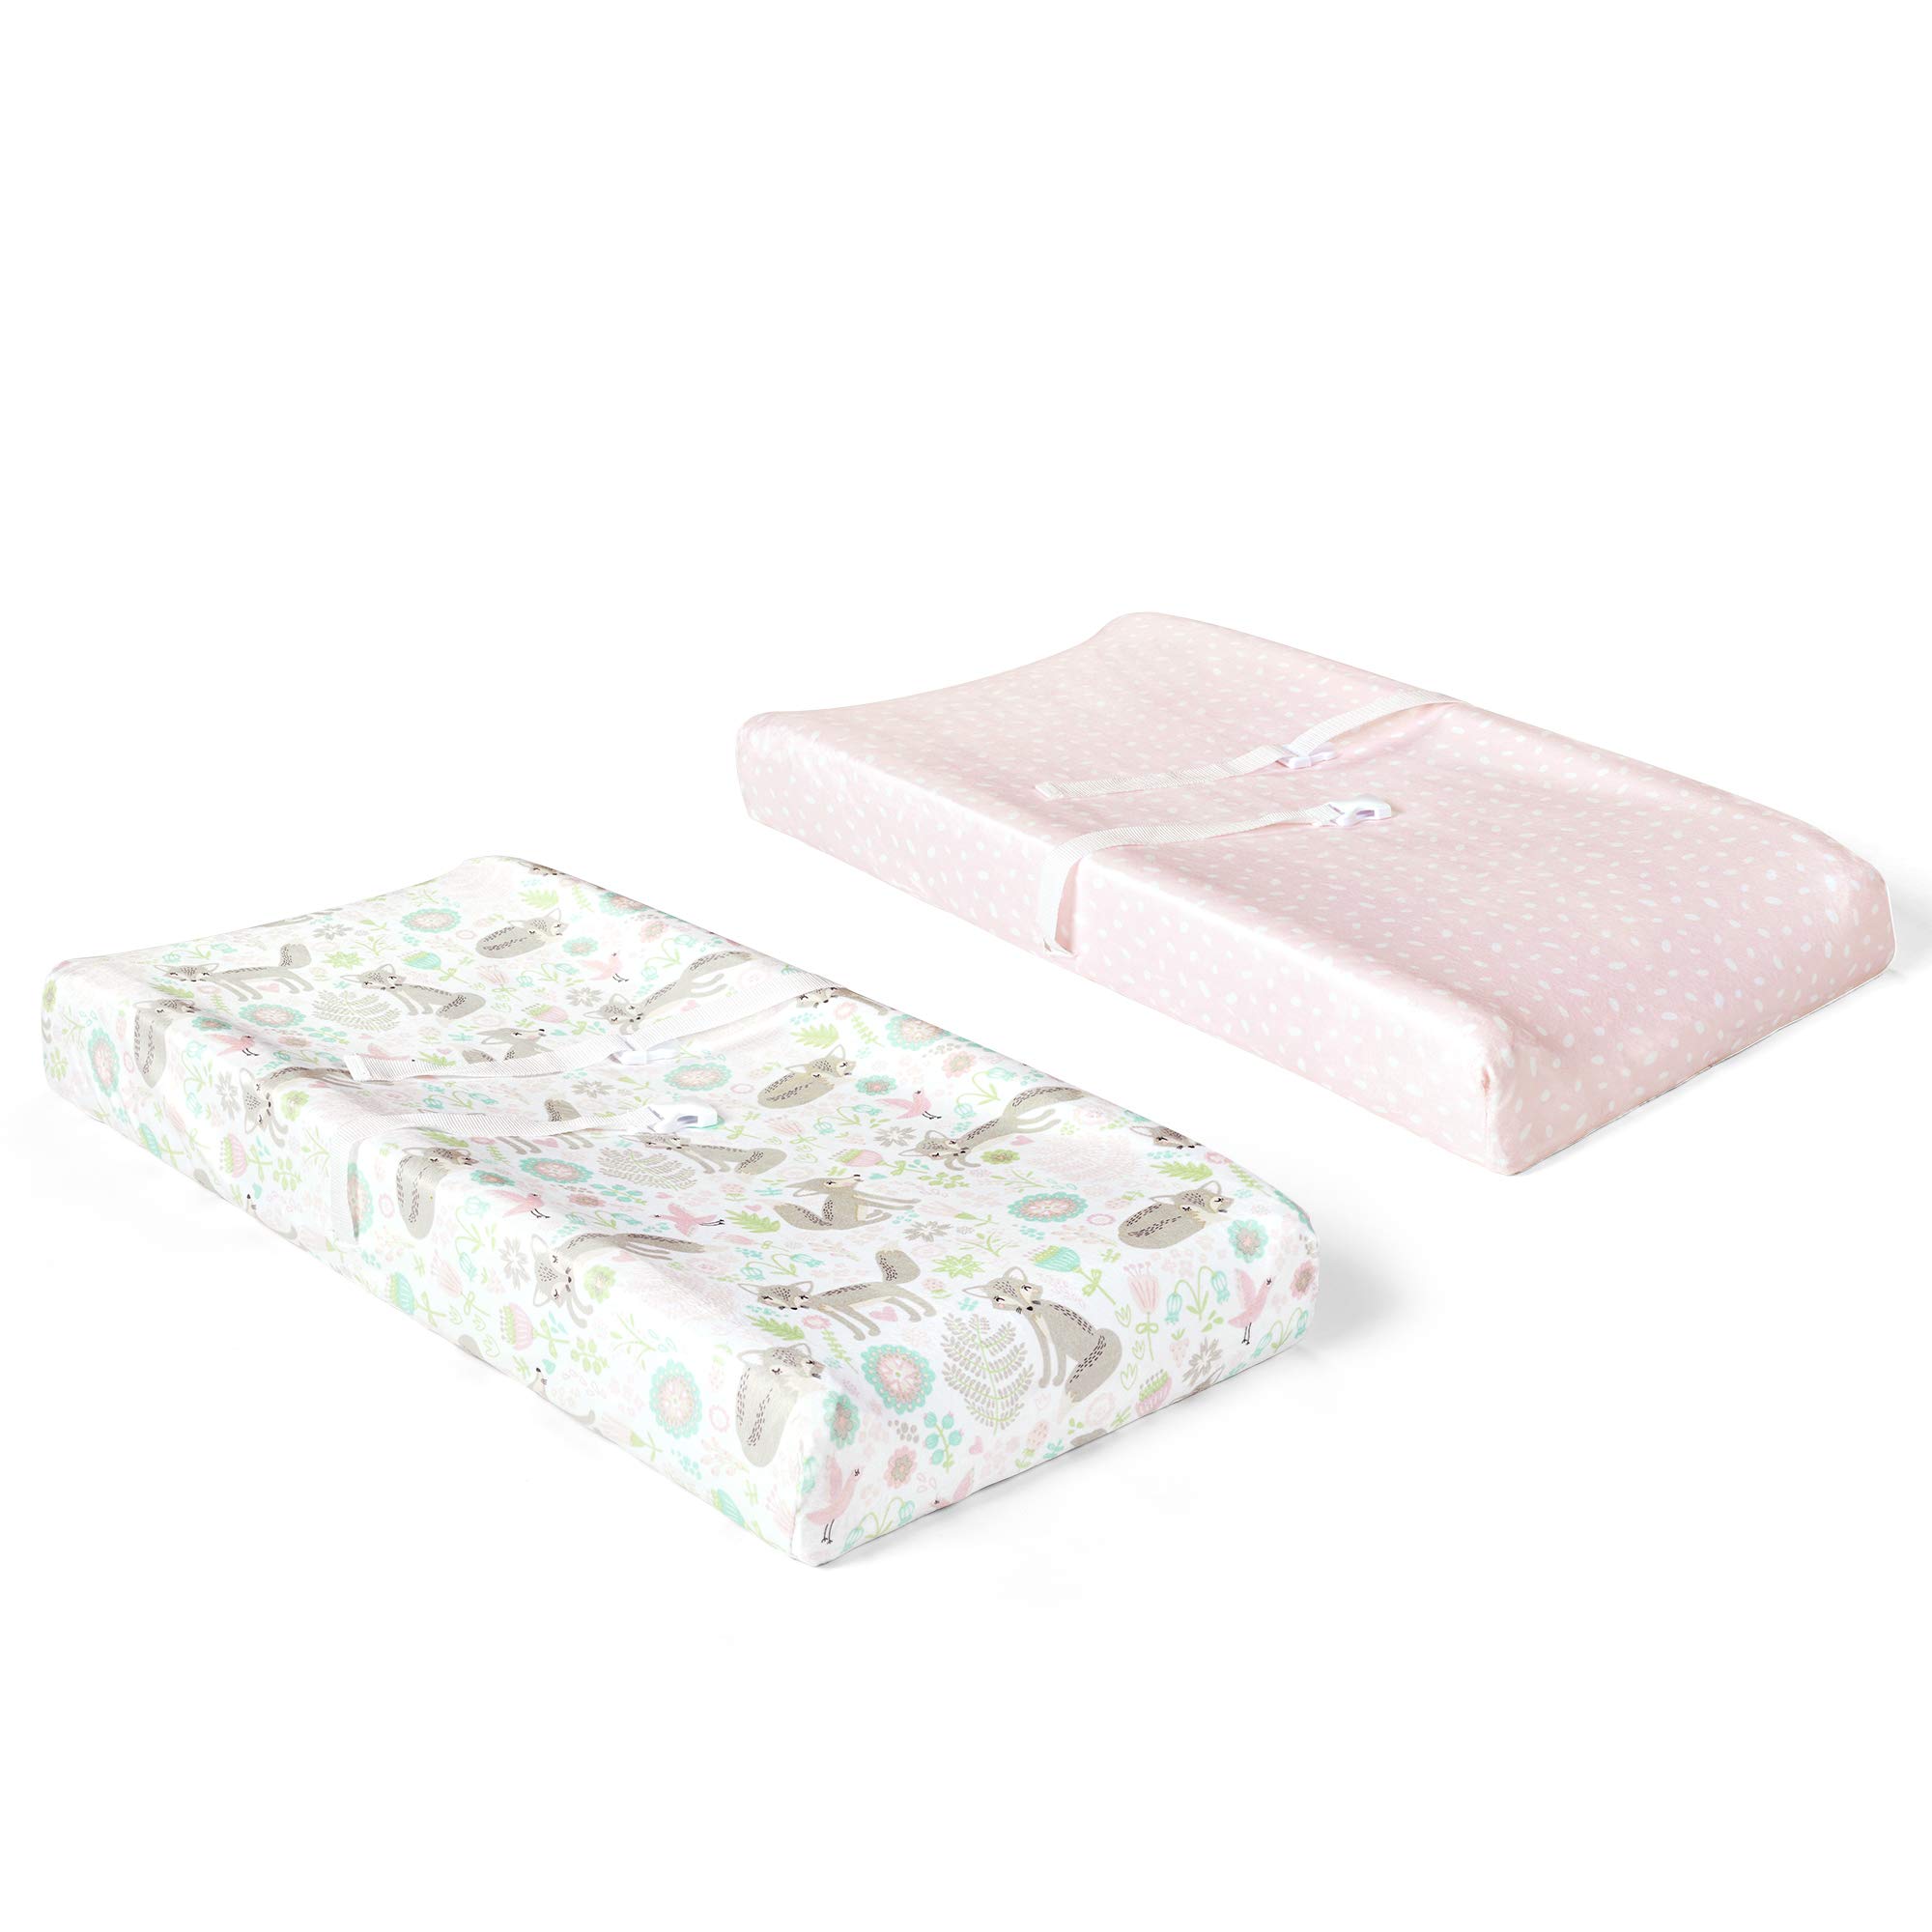 Lush Decor Baby Pixie Fox Geo Micro Mink 2 Pack Changing Pad Cover, Multicolored